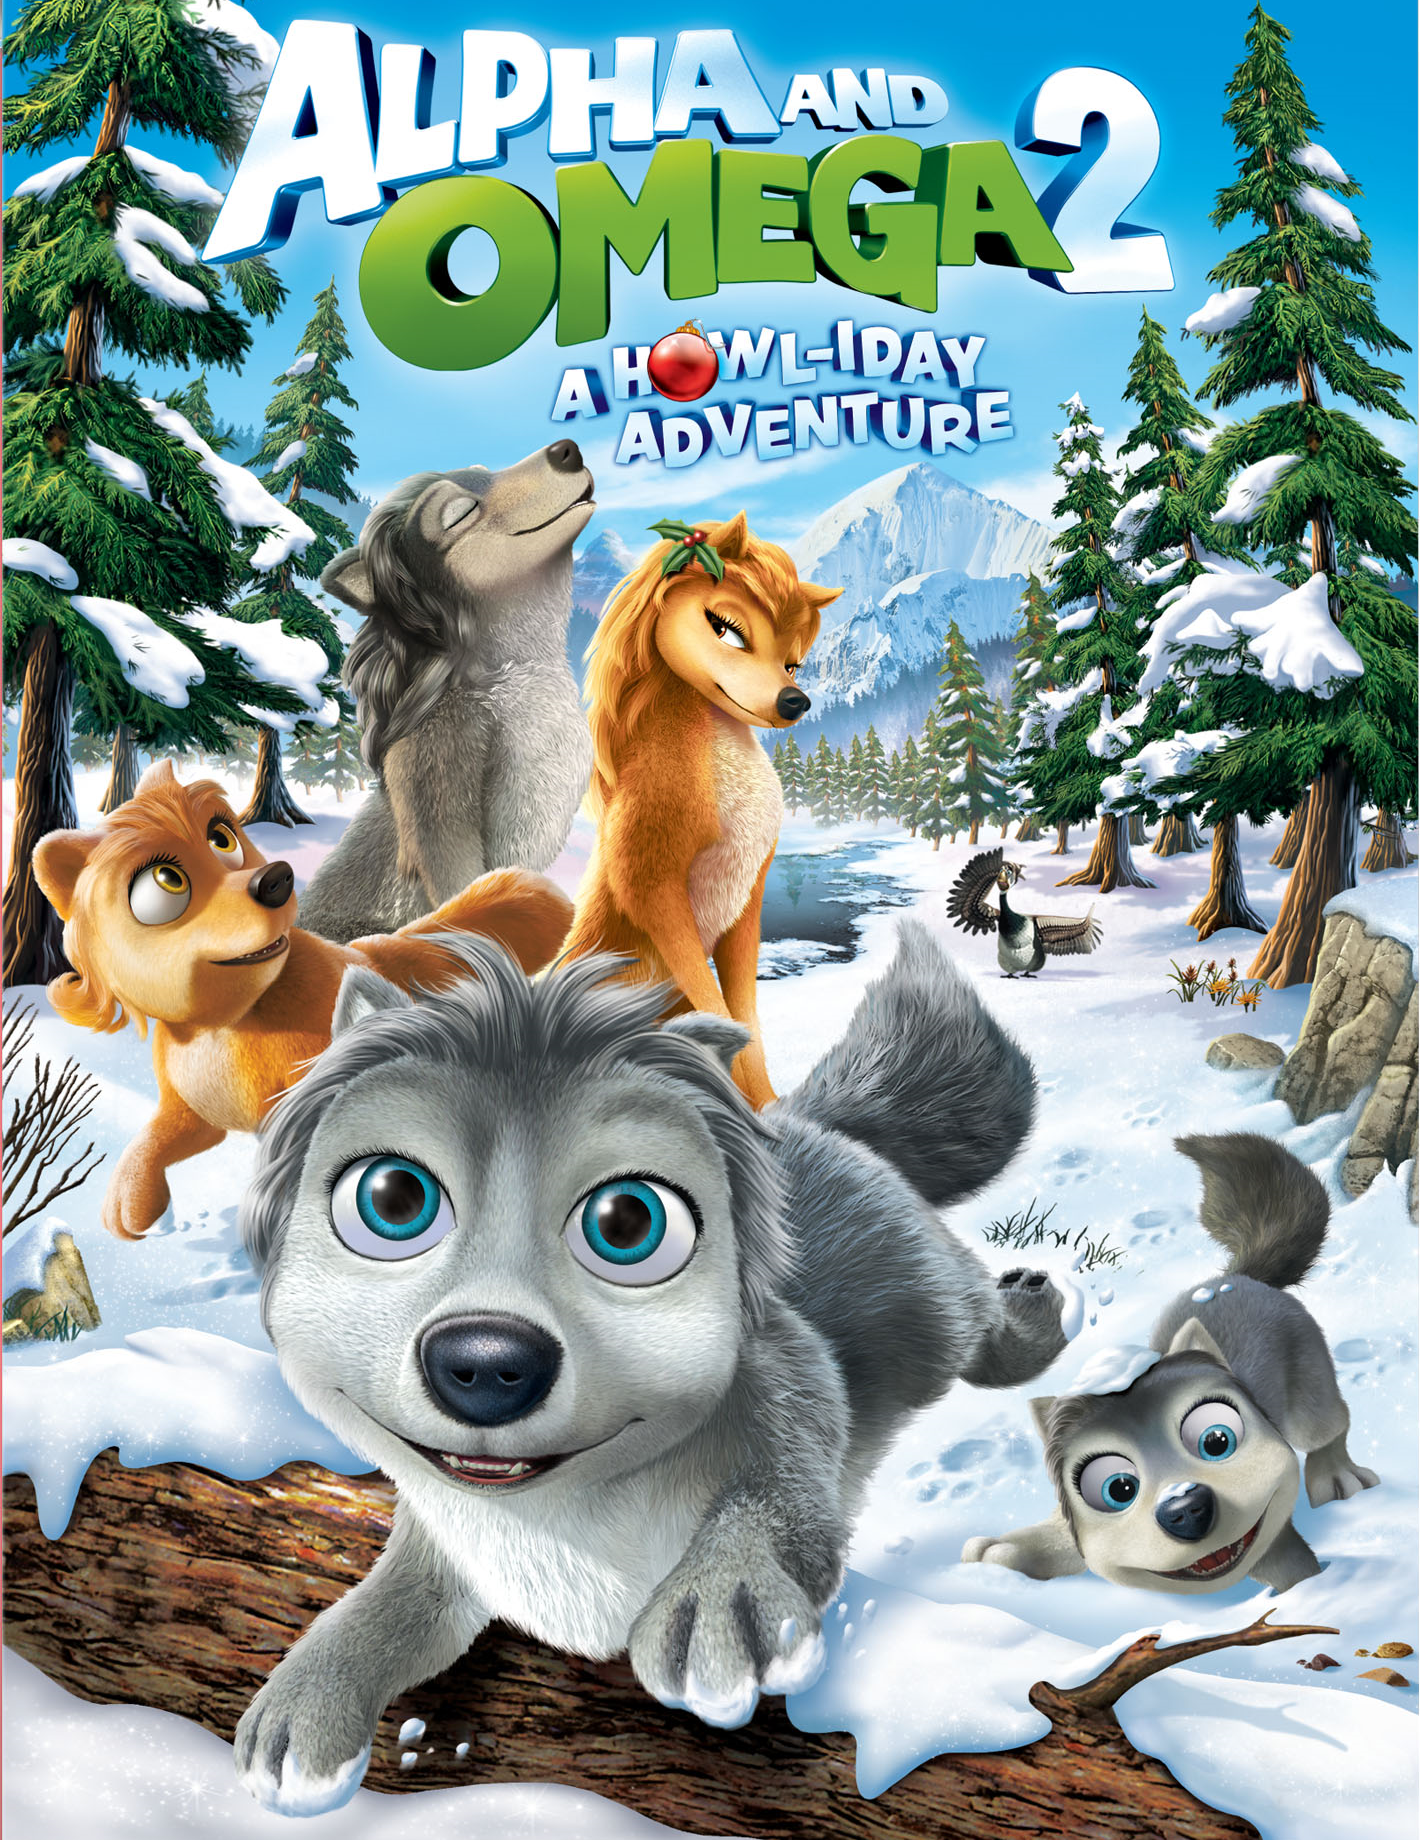 Alpha and Omega 3: The Great Wolf Games Blu-ray (Blu-ray + DVD +